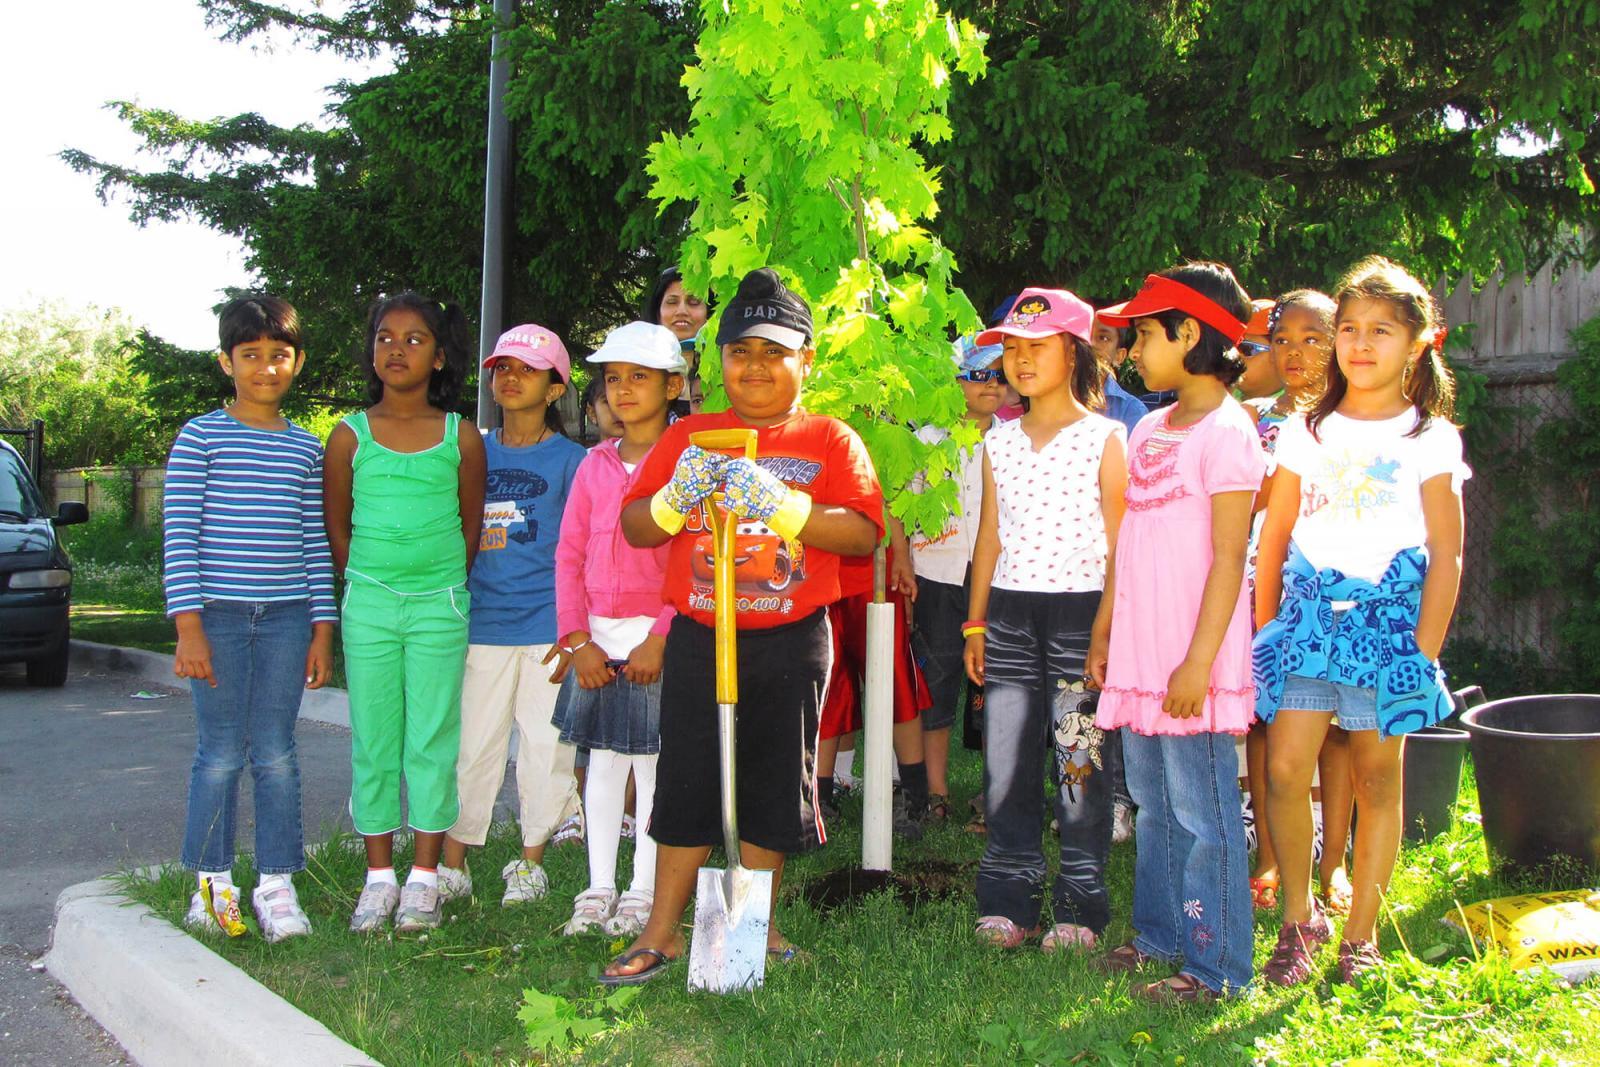 The children from Lancaster Elementary School in Mississauga stand proudly by their new maple tree donated by Landscape Ontario.